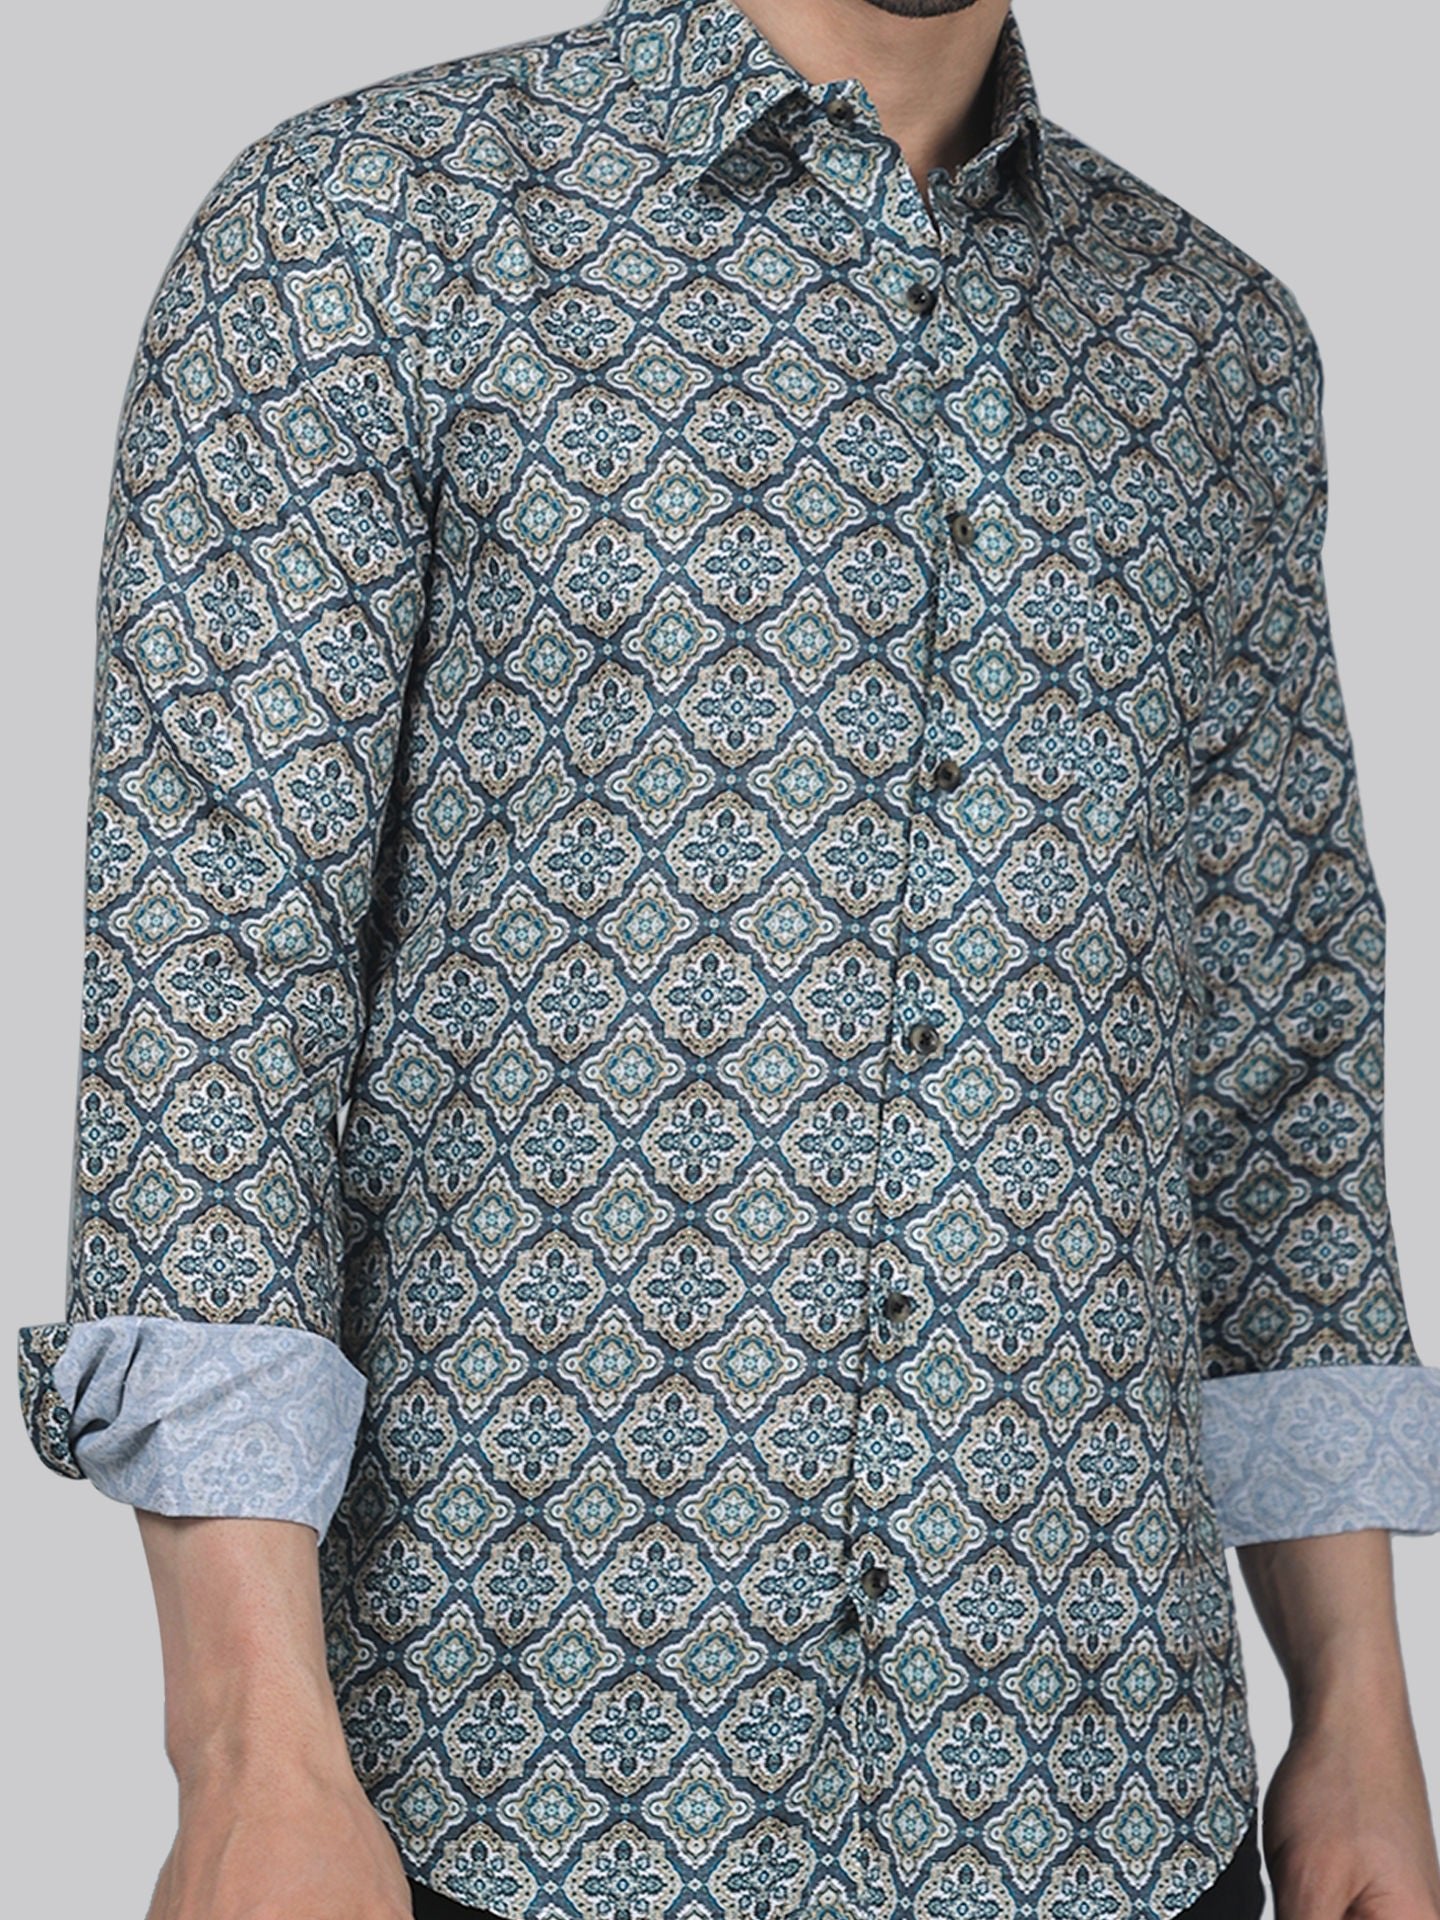 Exotic-glam Men's Printed Full Sleeve Casual Linen Shirt - TryBuy® USA🇺🇸